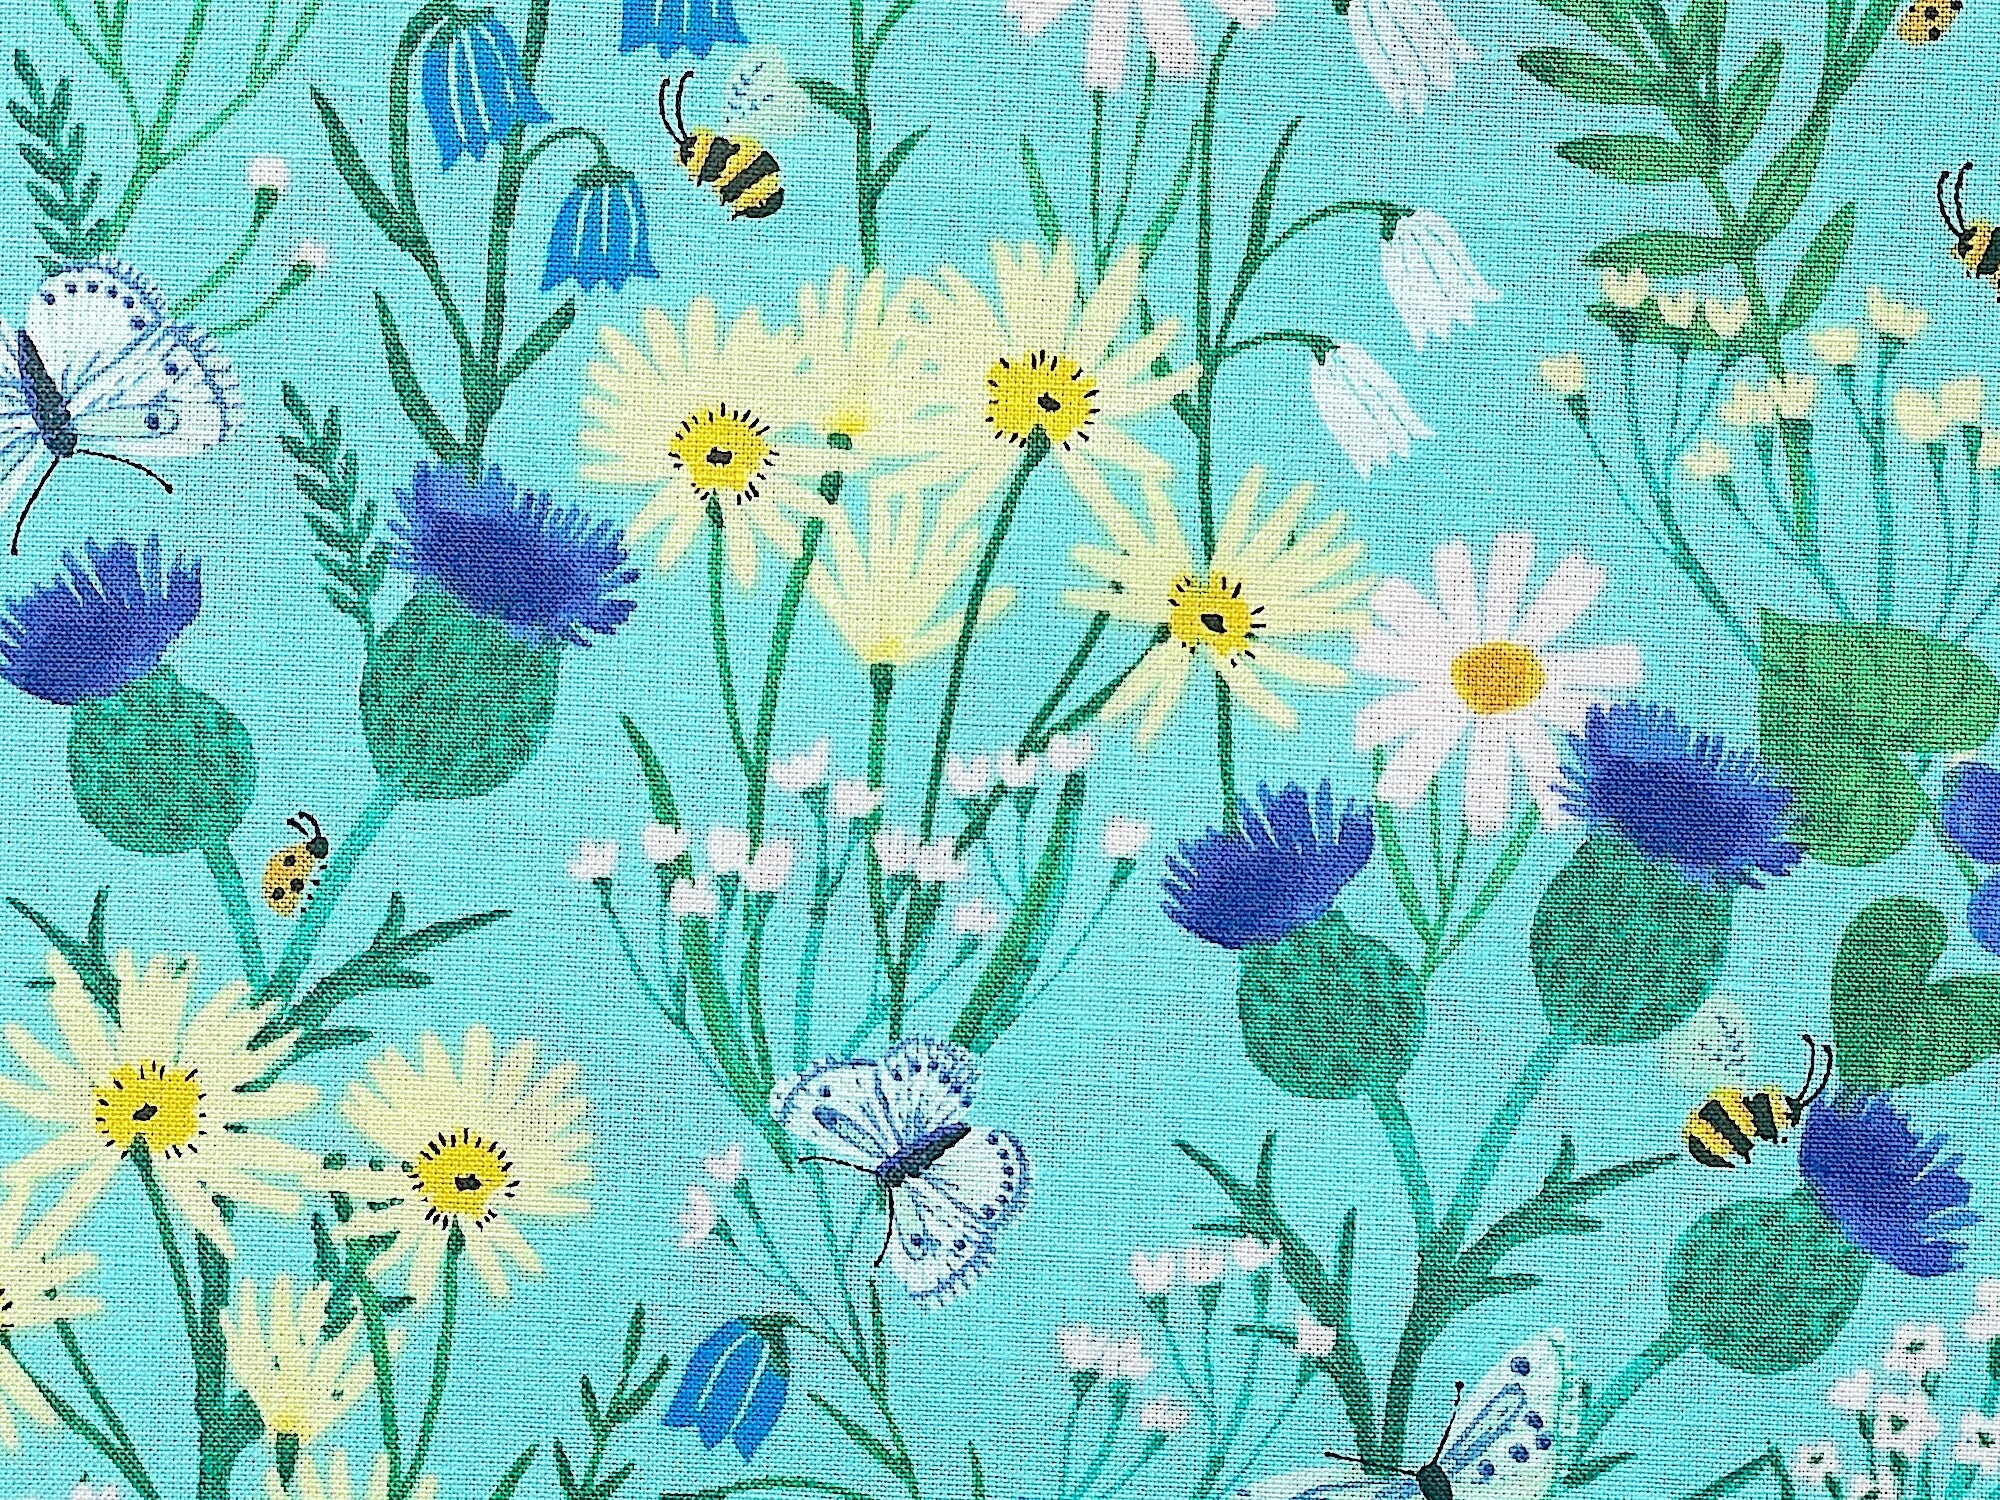 Close up of wildflowers, butterflies and bees.